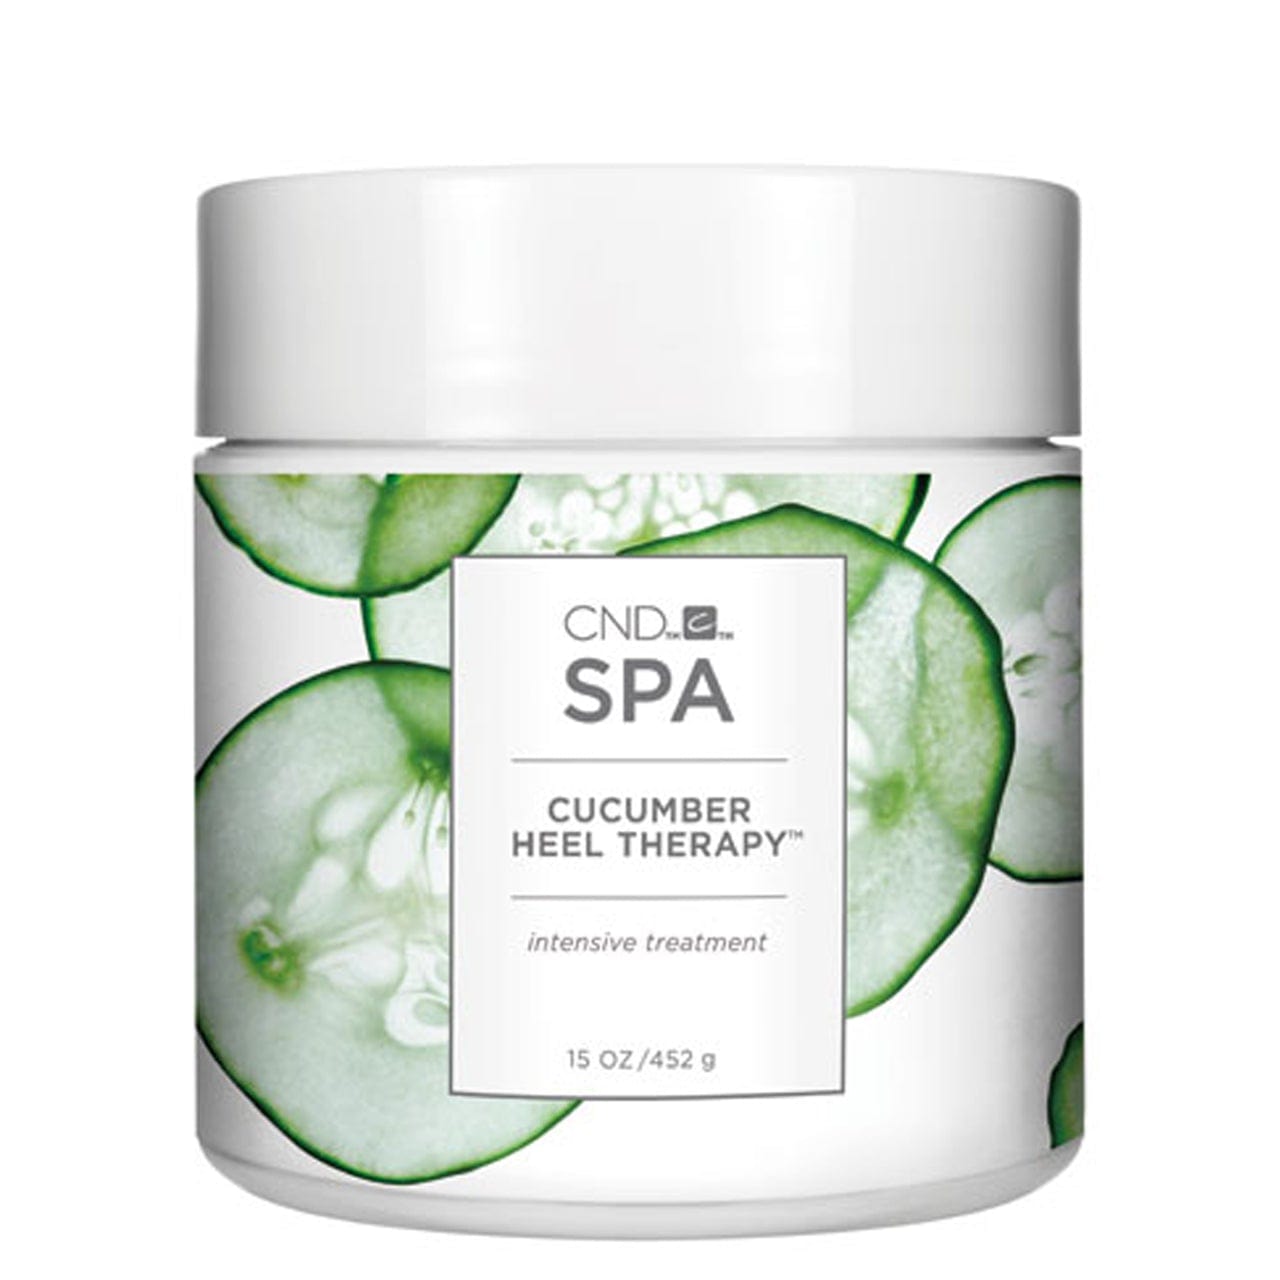 CND Cucumber Heel Therapy™ Intensive Treatment